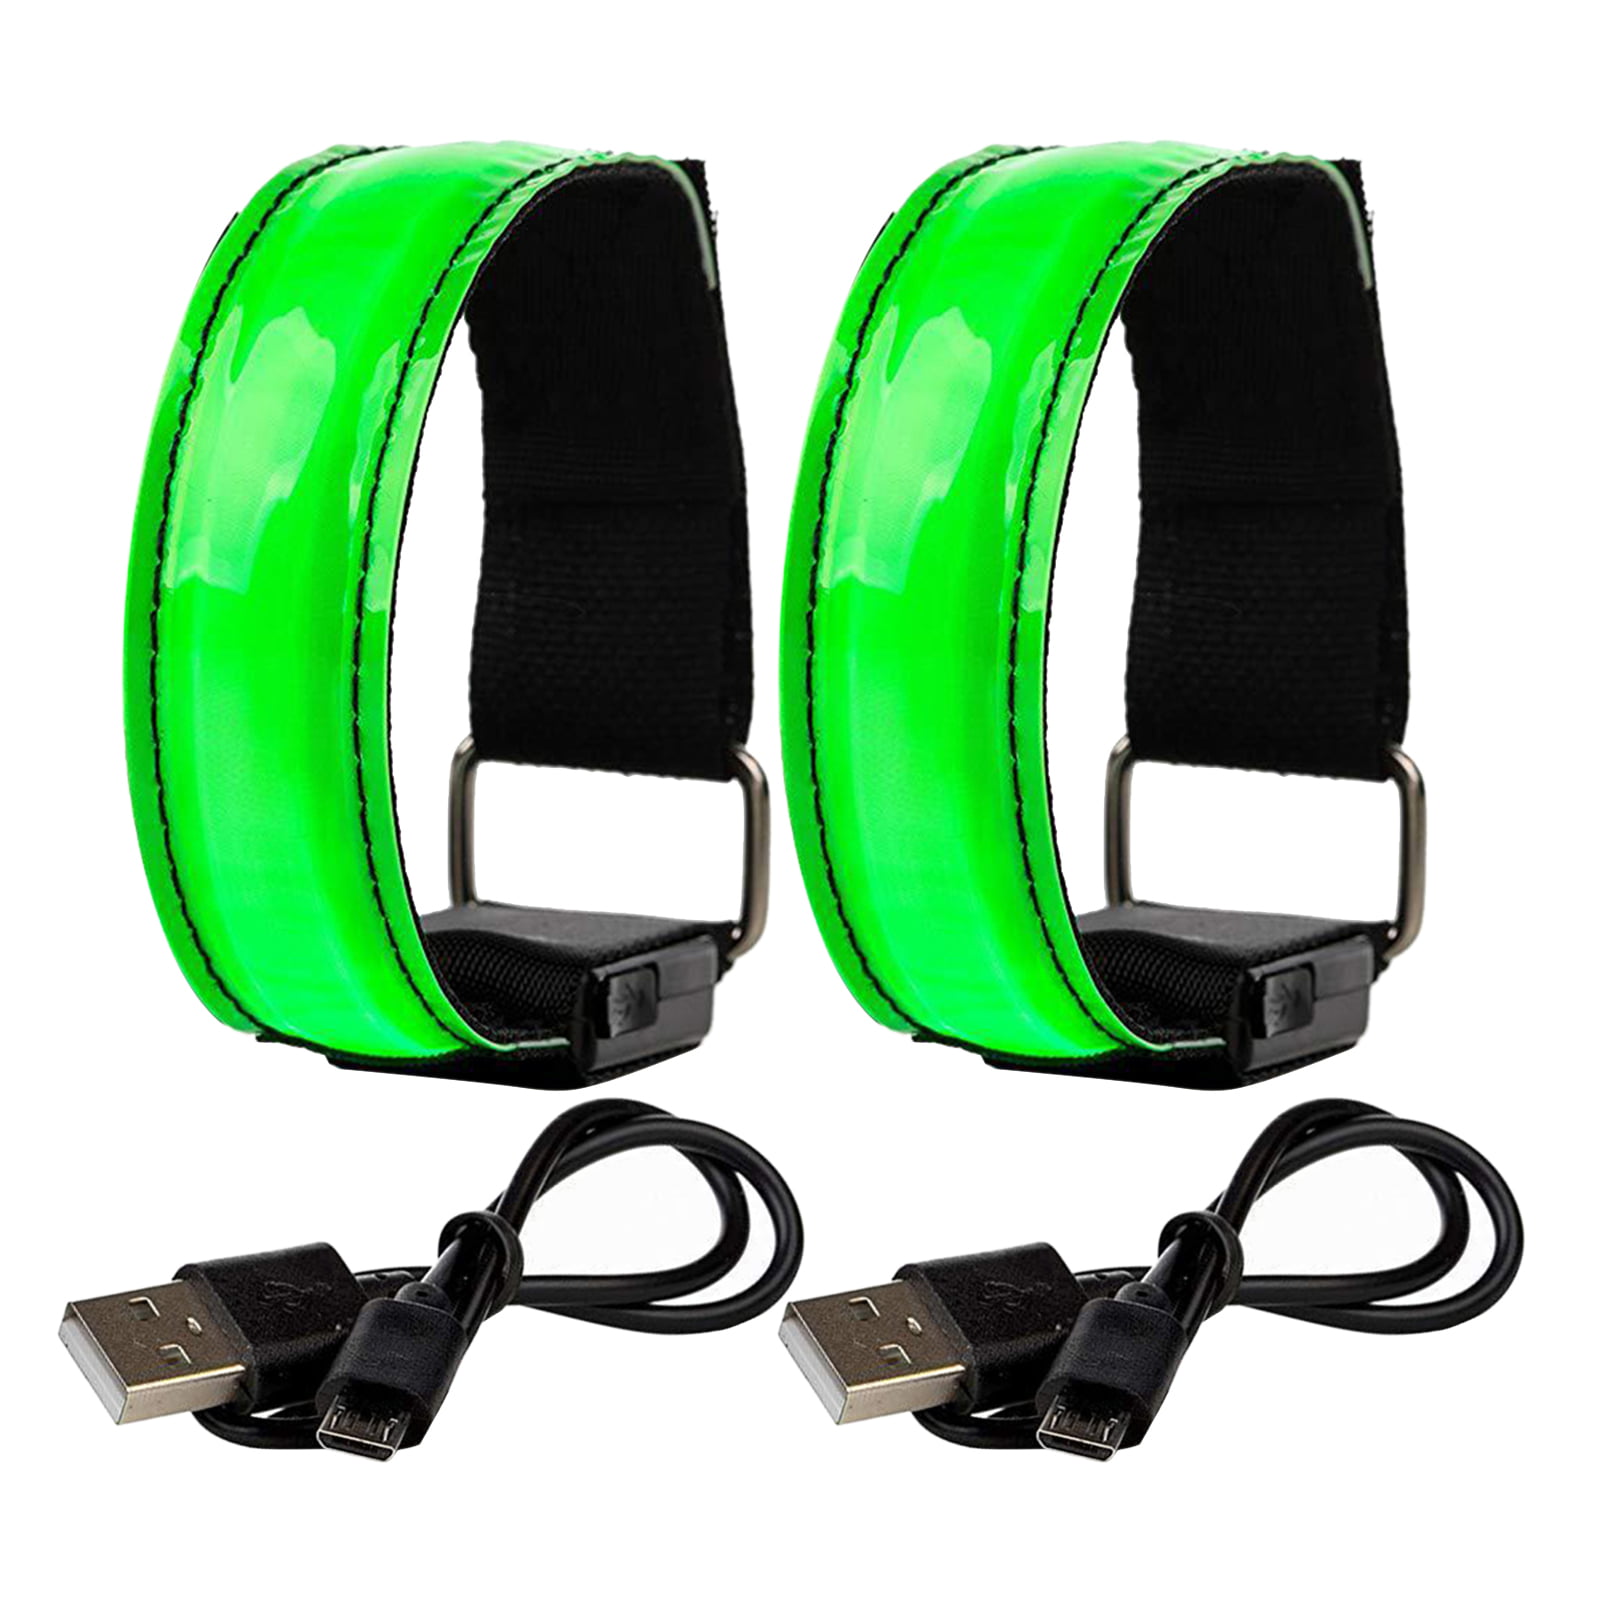 Details about   2 Pack Reflective Tape Bands Adjustable Running Gear Safety reflector Arm Strap 